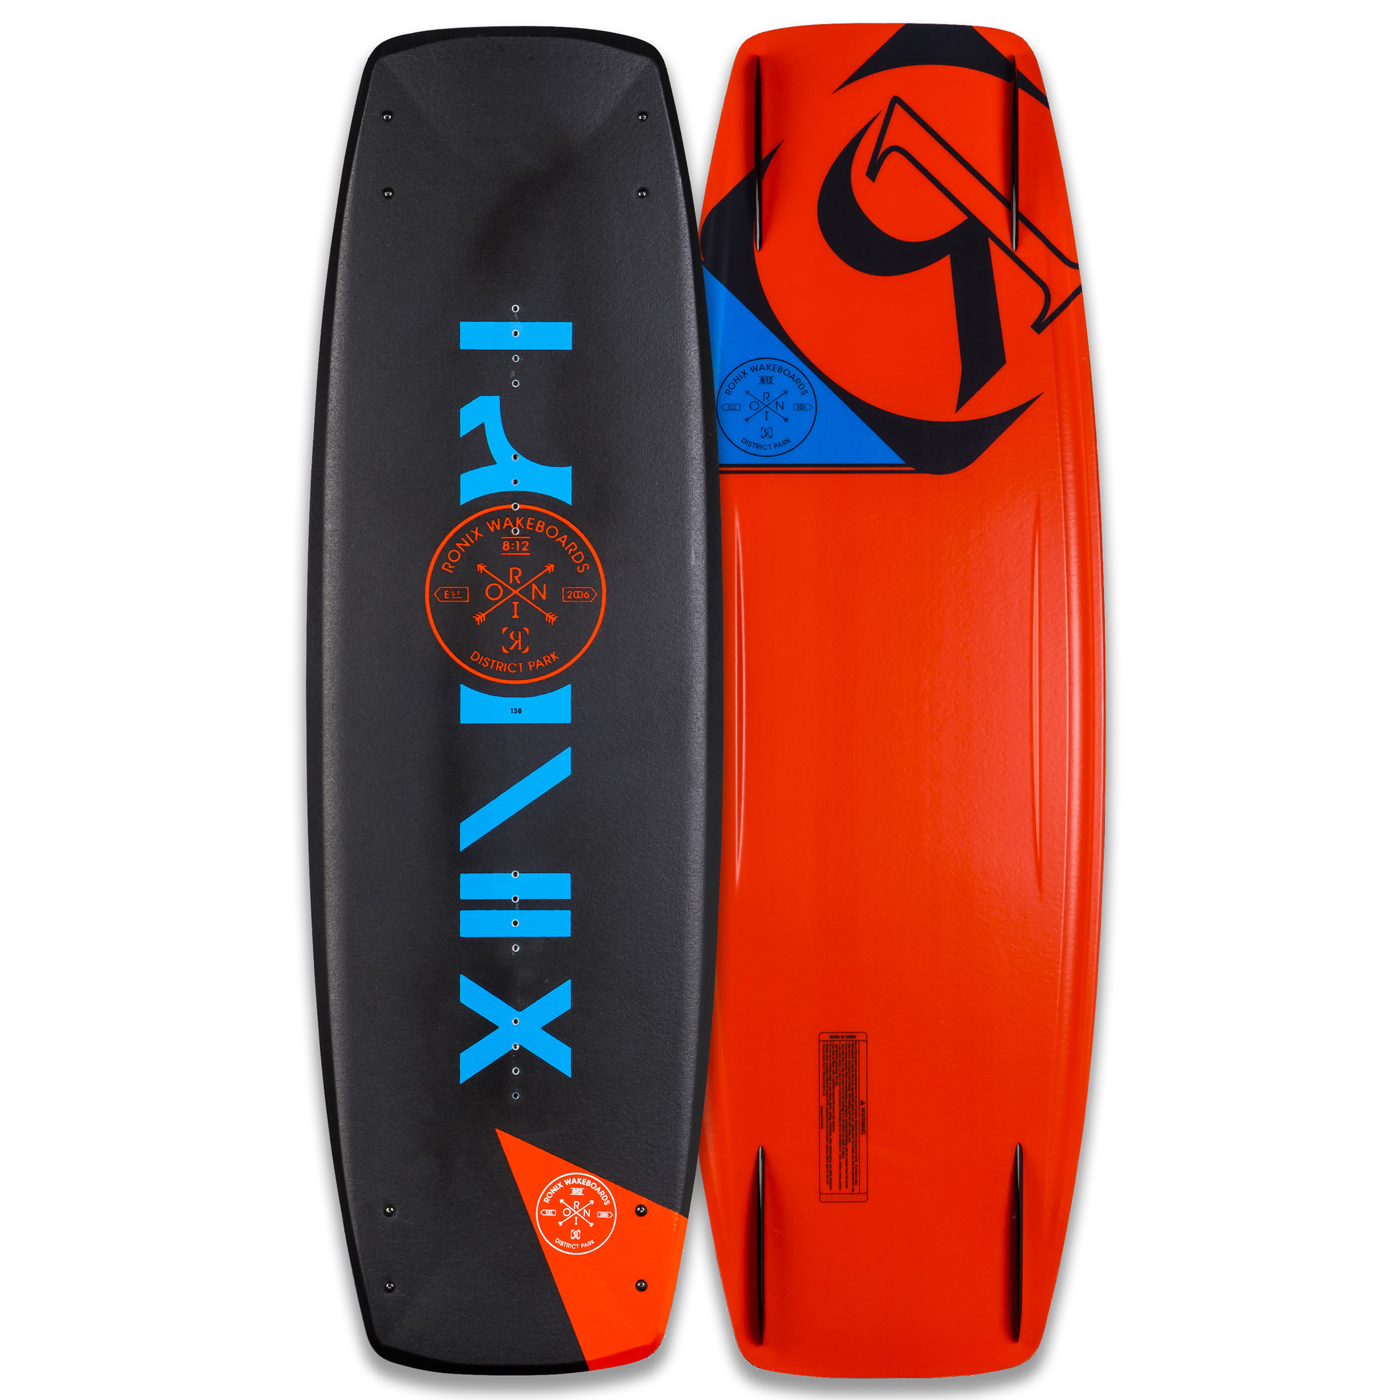   DISTRICT PARK 138 WAKEBOARD RONIX 2016